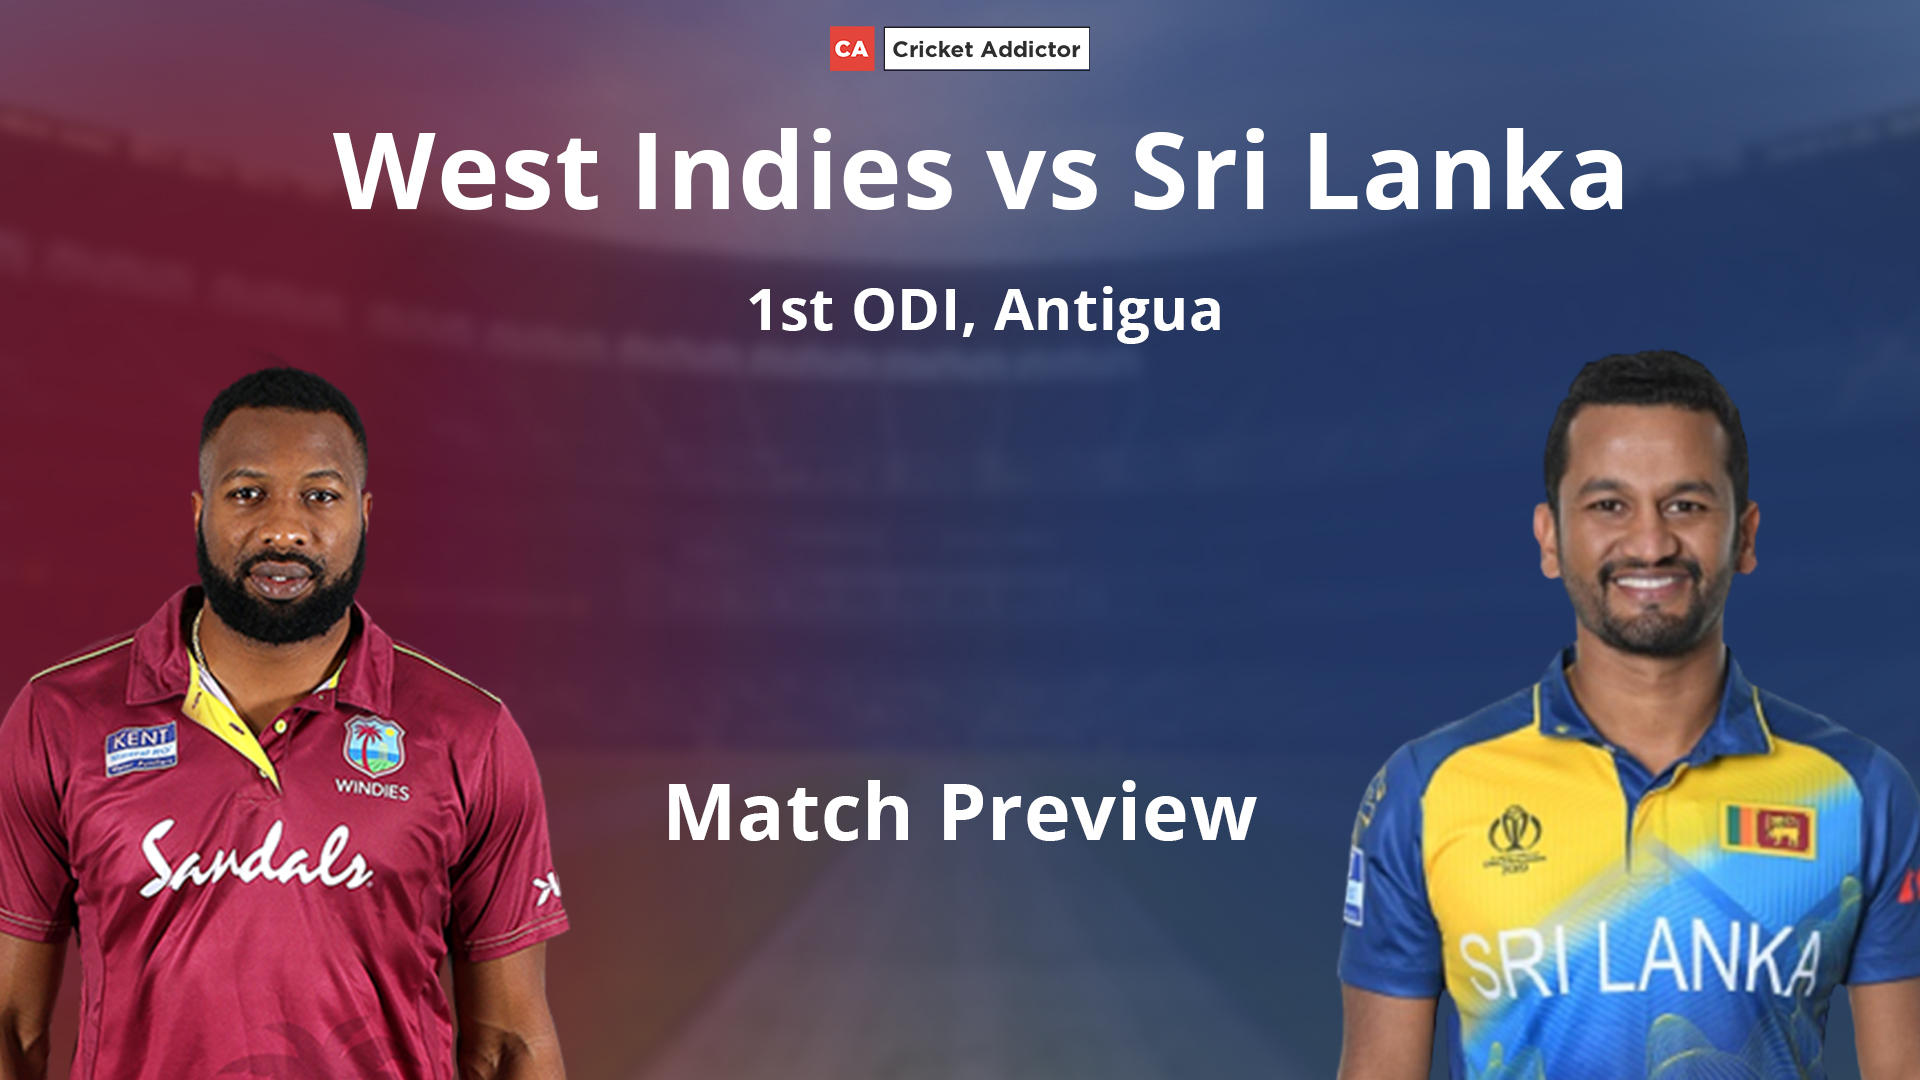 West Indies vs Sri Lanka 2021, 1st ODI: Match Preview And Prediction